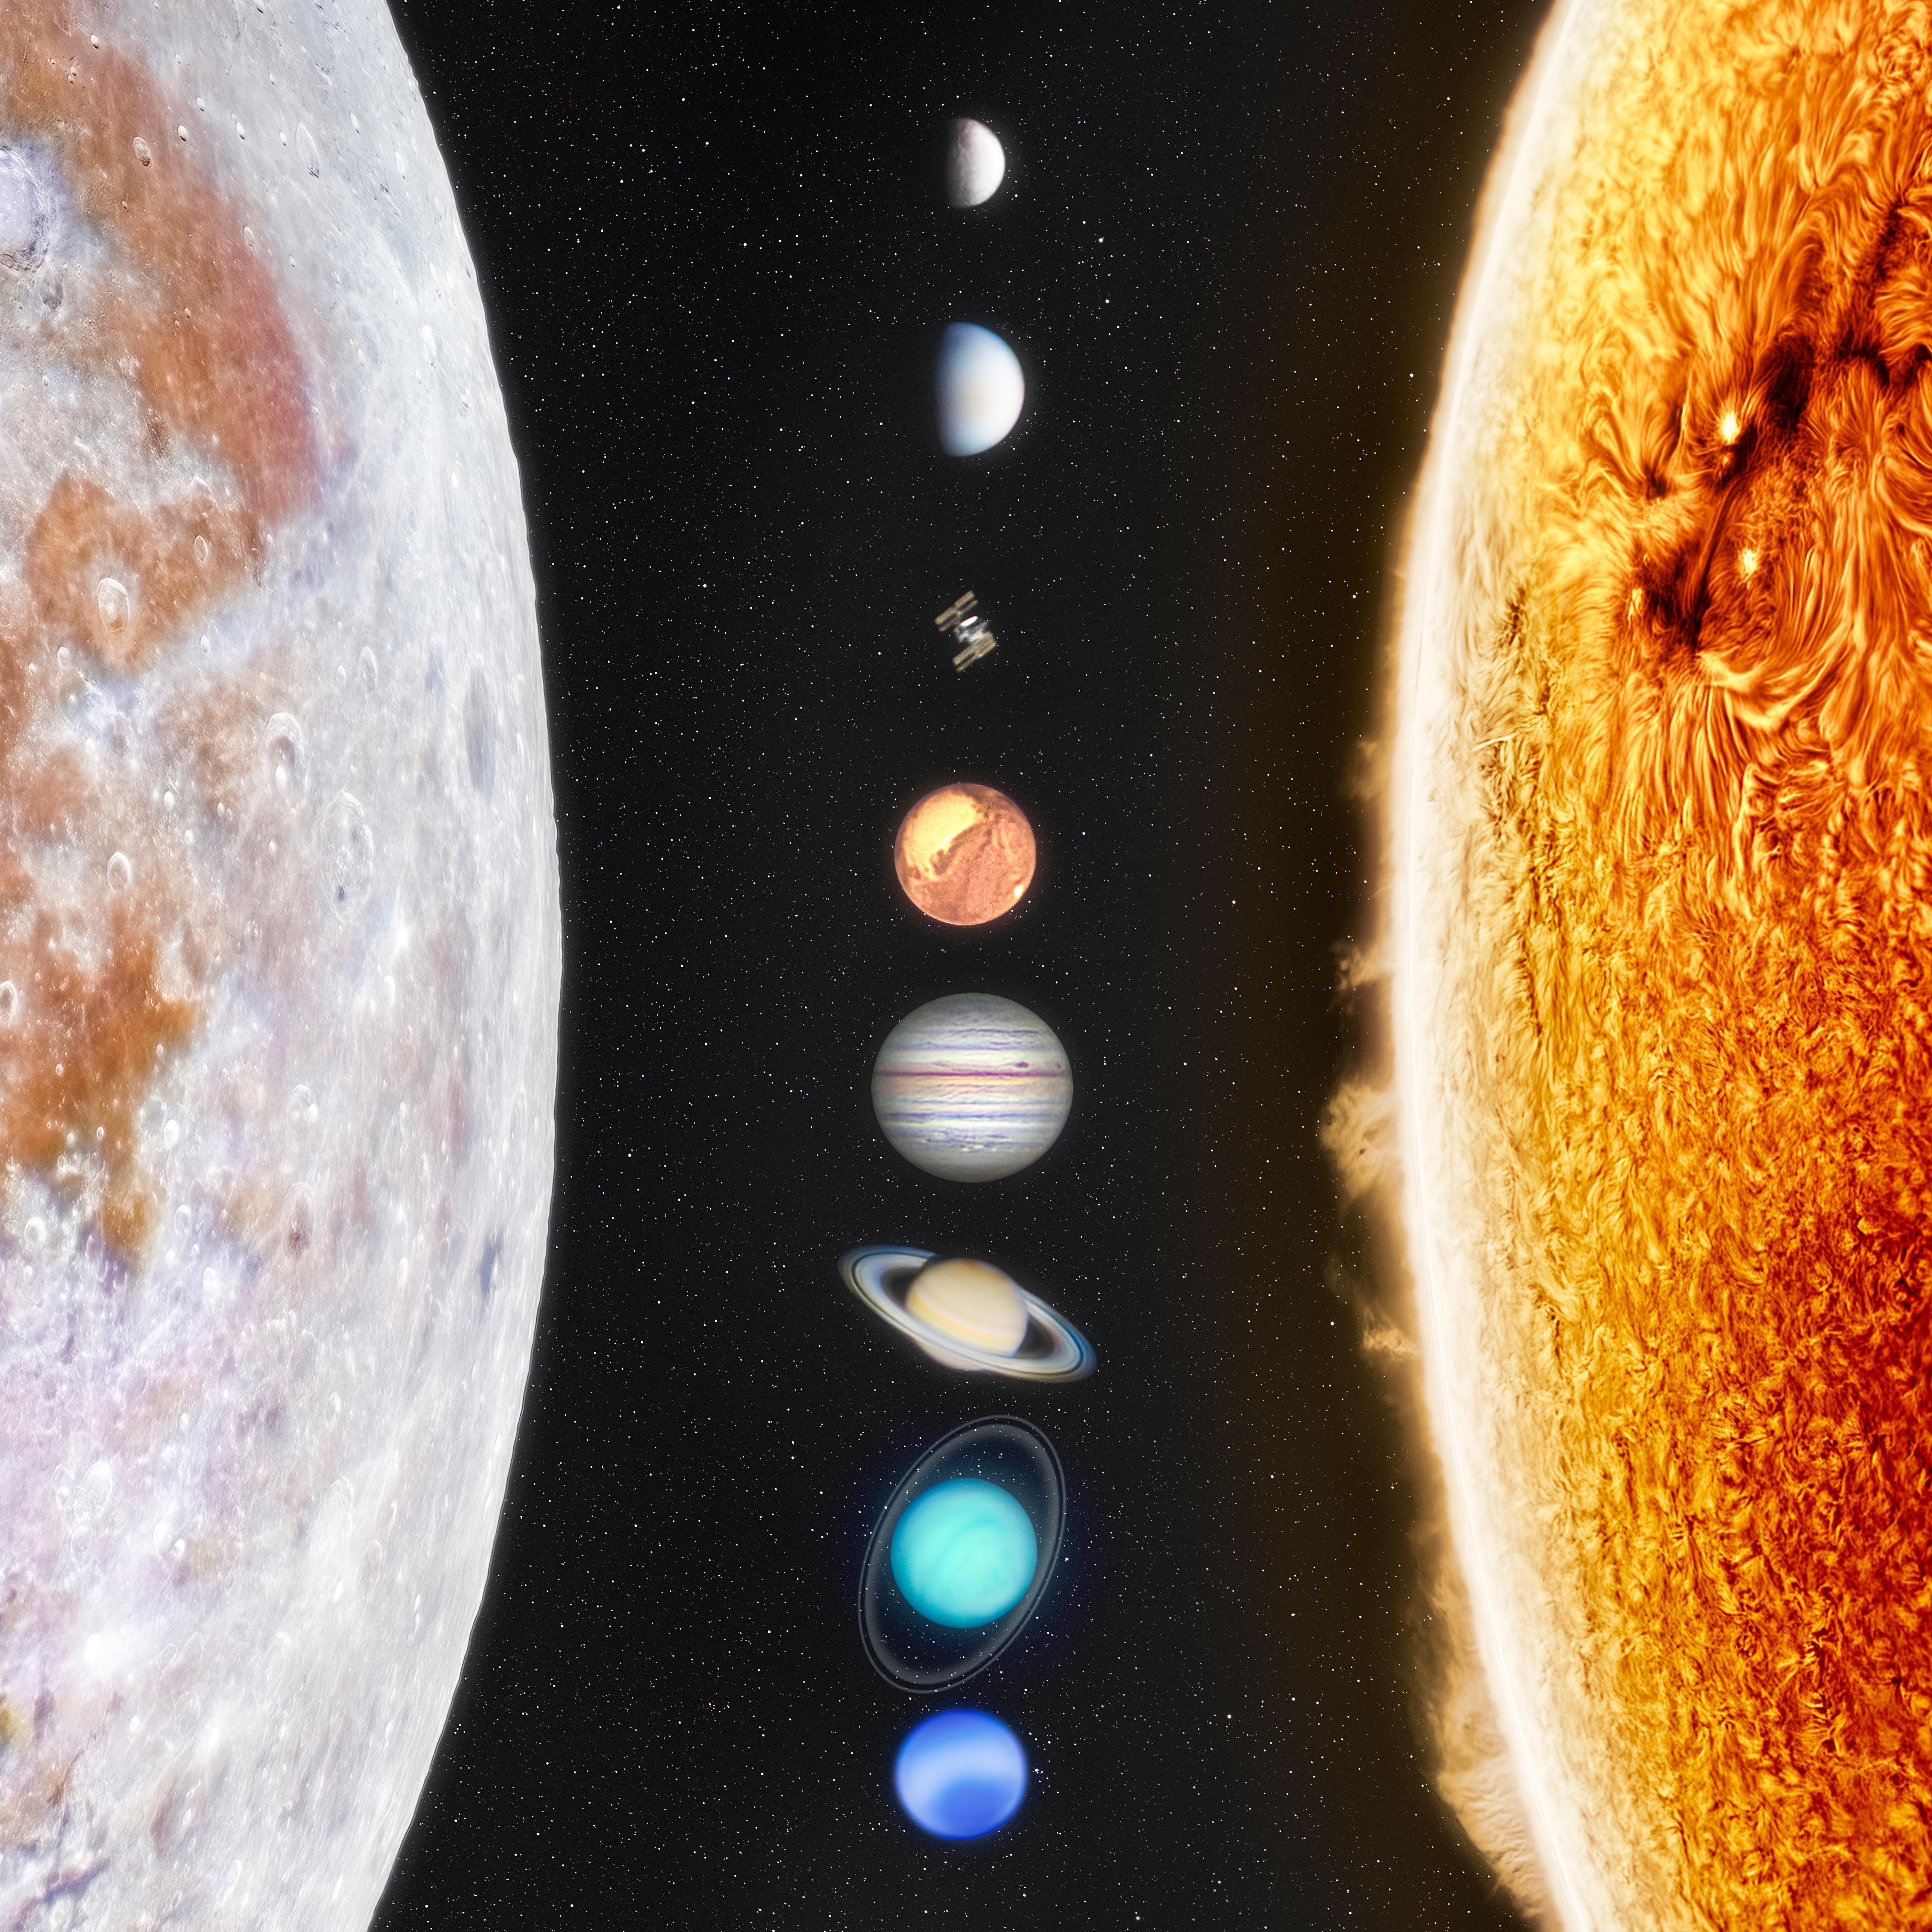 Every year I put together a family portrait of our solar system using images captured from my backyard. Here is this year's effort.jpg